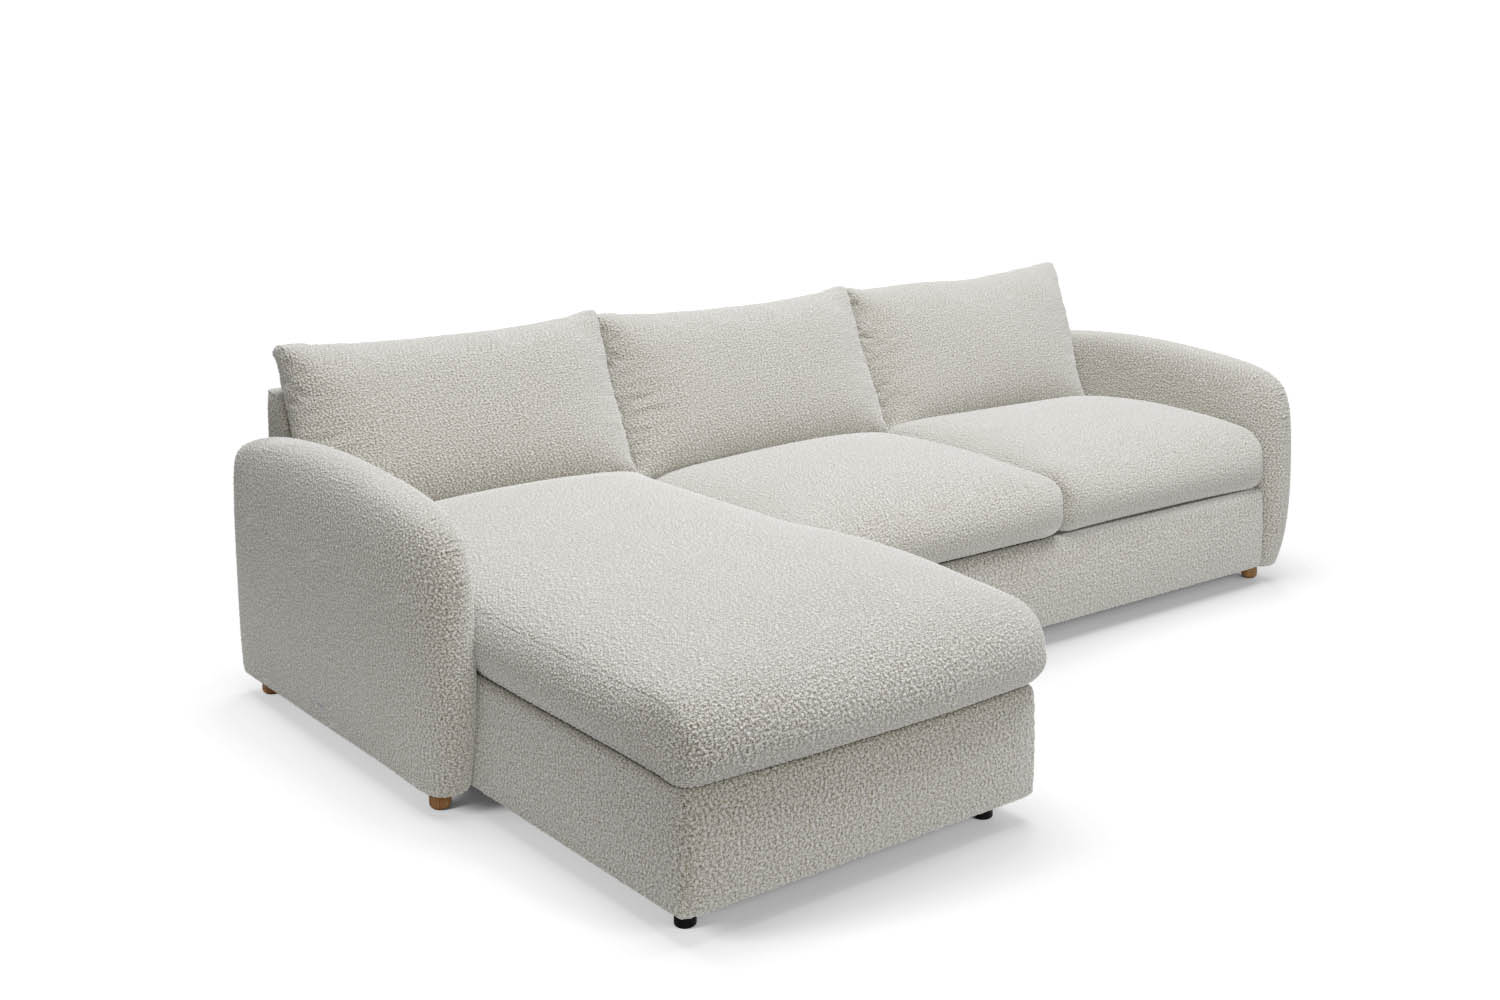 The Small Biggie - Chaise Sofa Bed - Fuzzy White Boucle